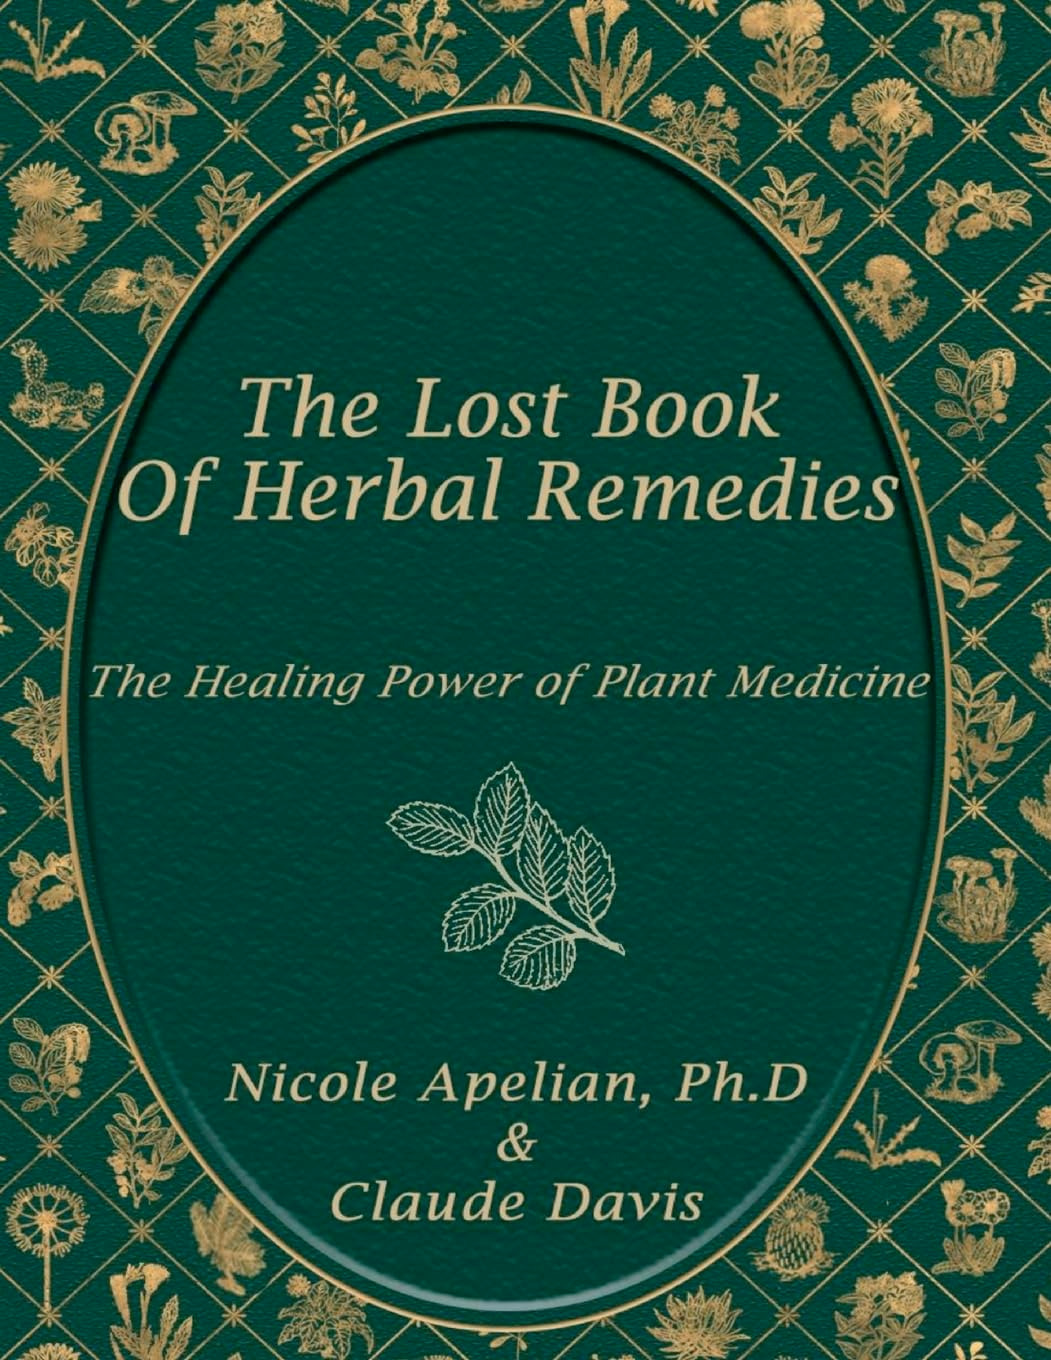 The Lost Book of Herbal Remedies: The Healing Power of Plant Medicine